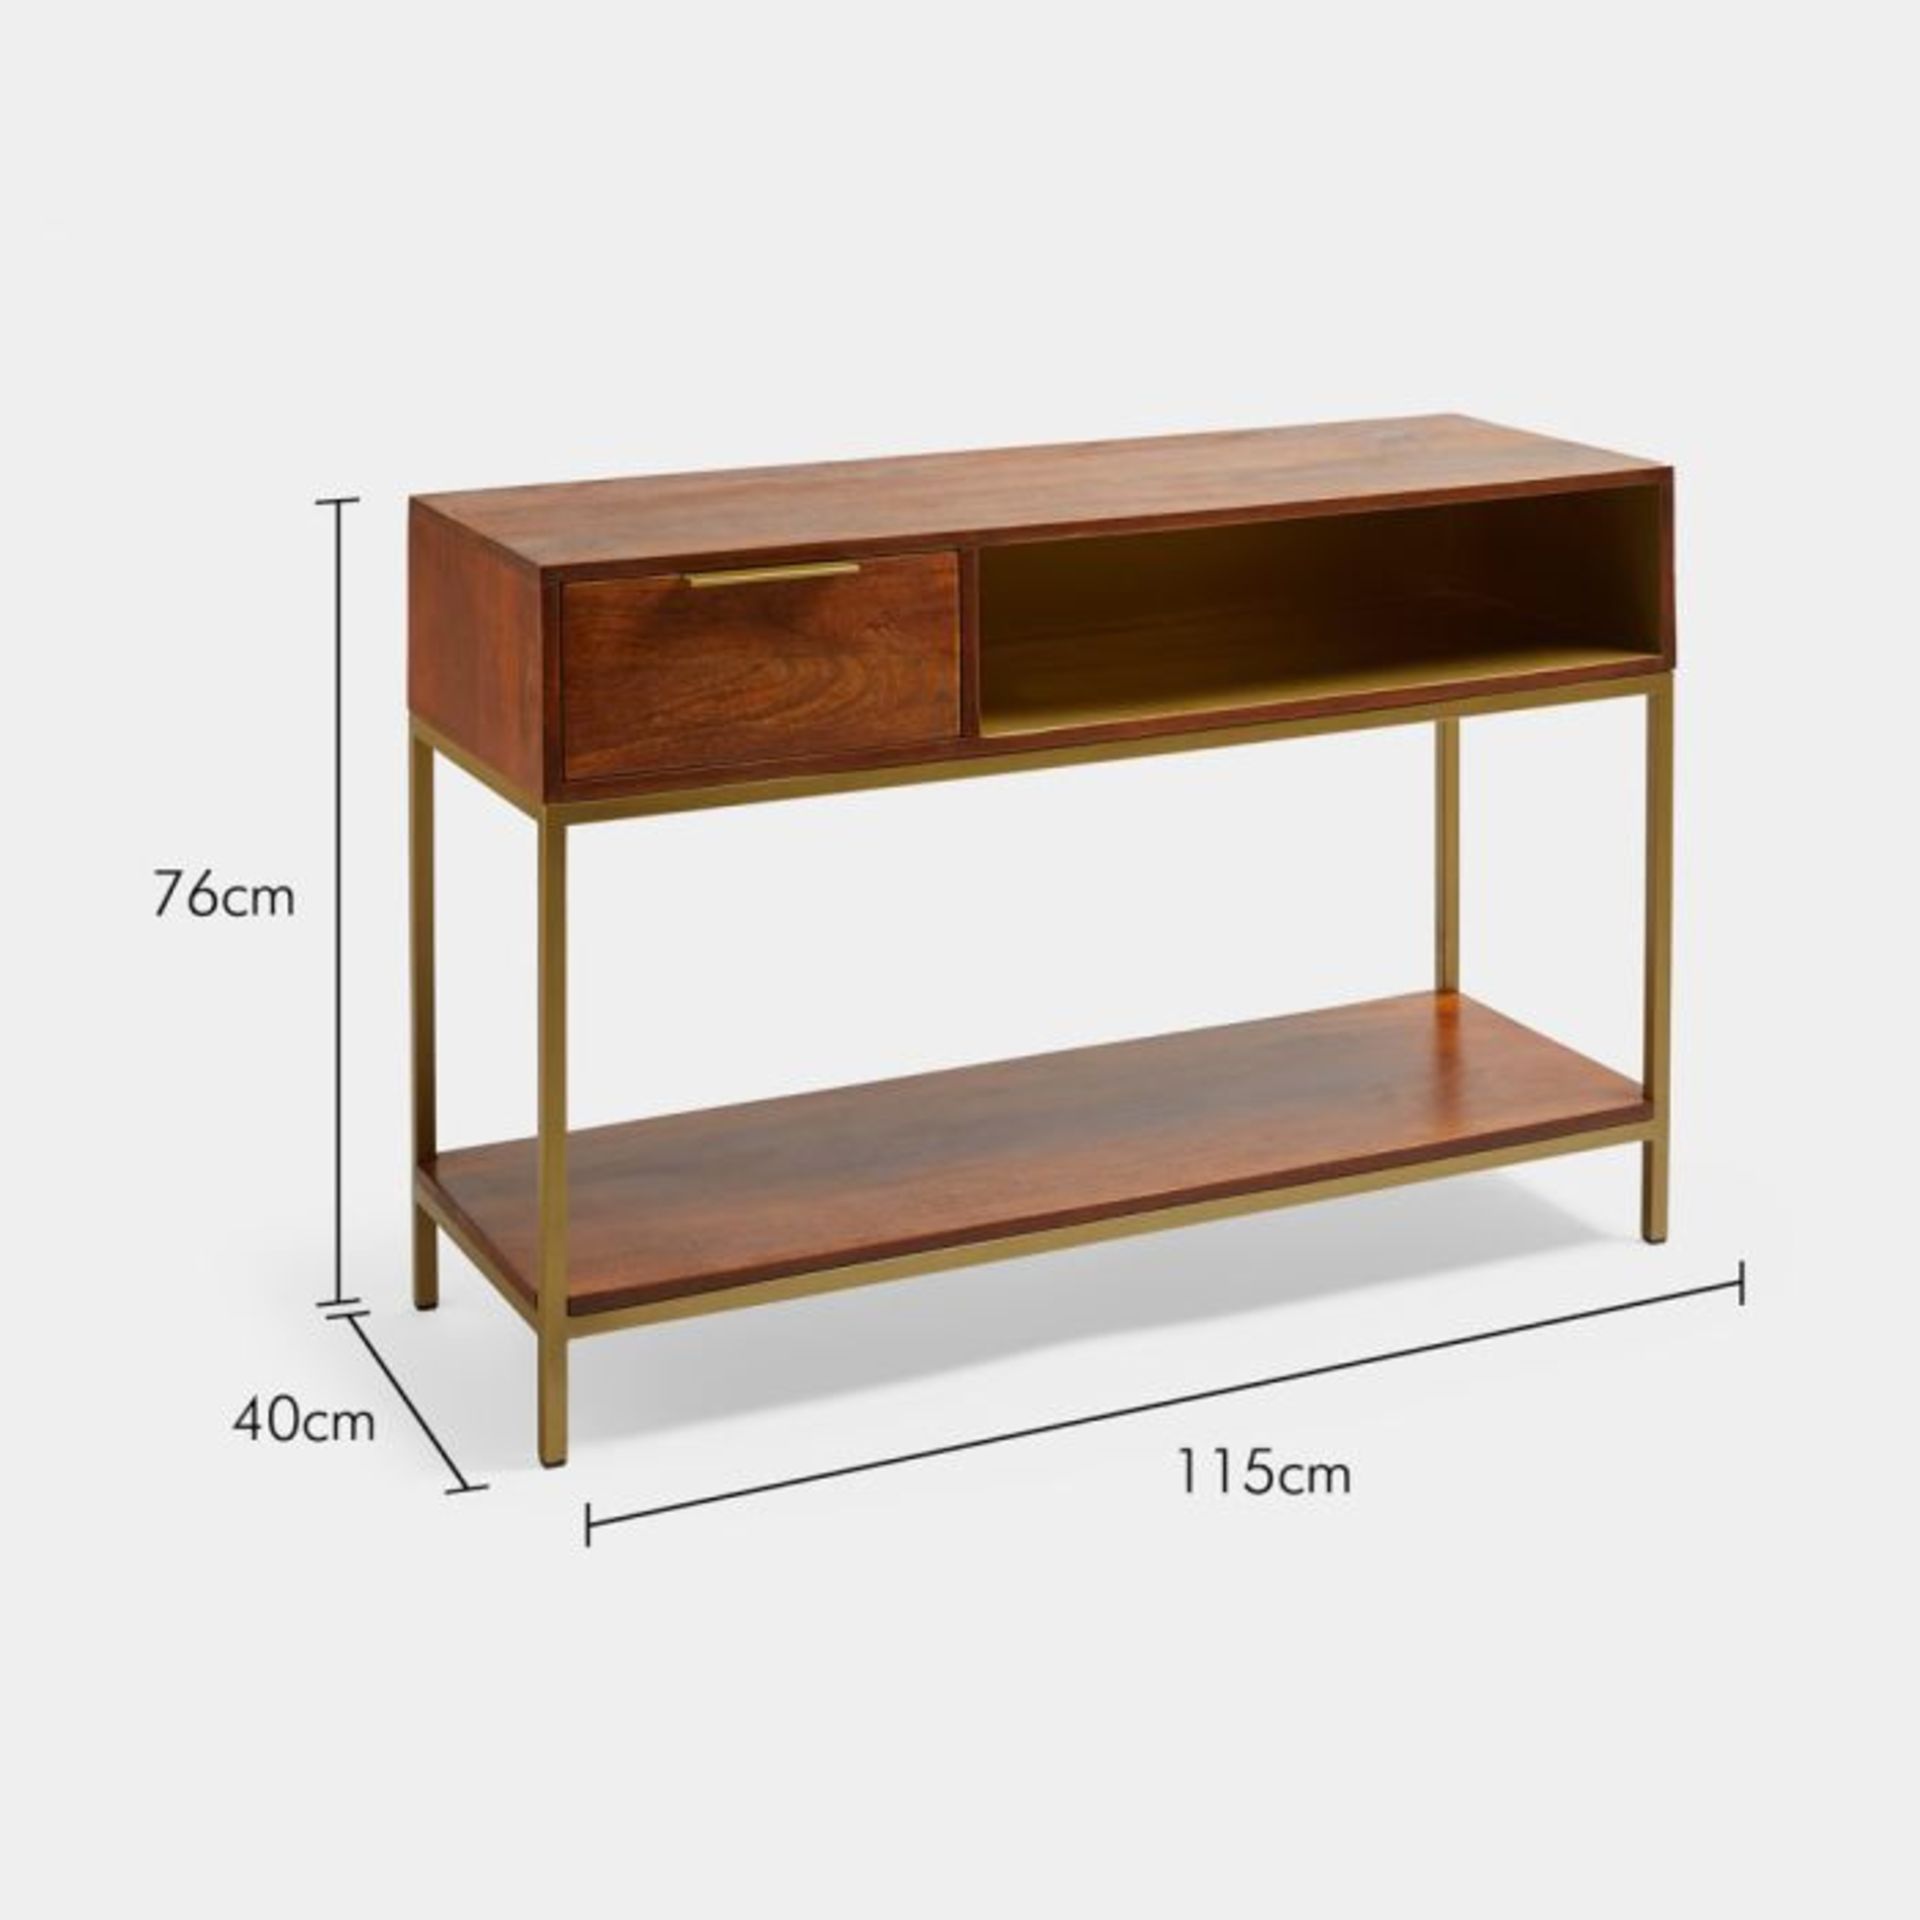 NEW & BOXED Abram Mango Wood & Brass Console Table. RRP £374.99. (649). Introduce our Abram - Image 4 of 4